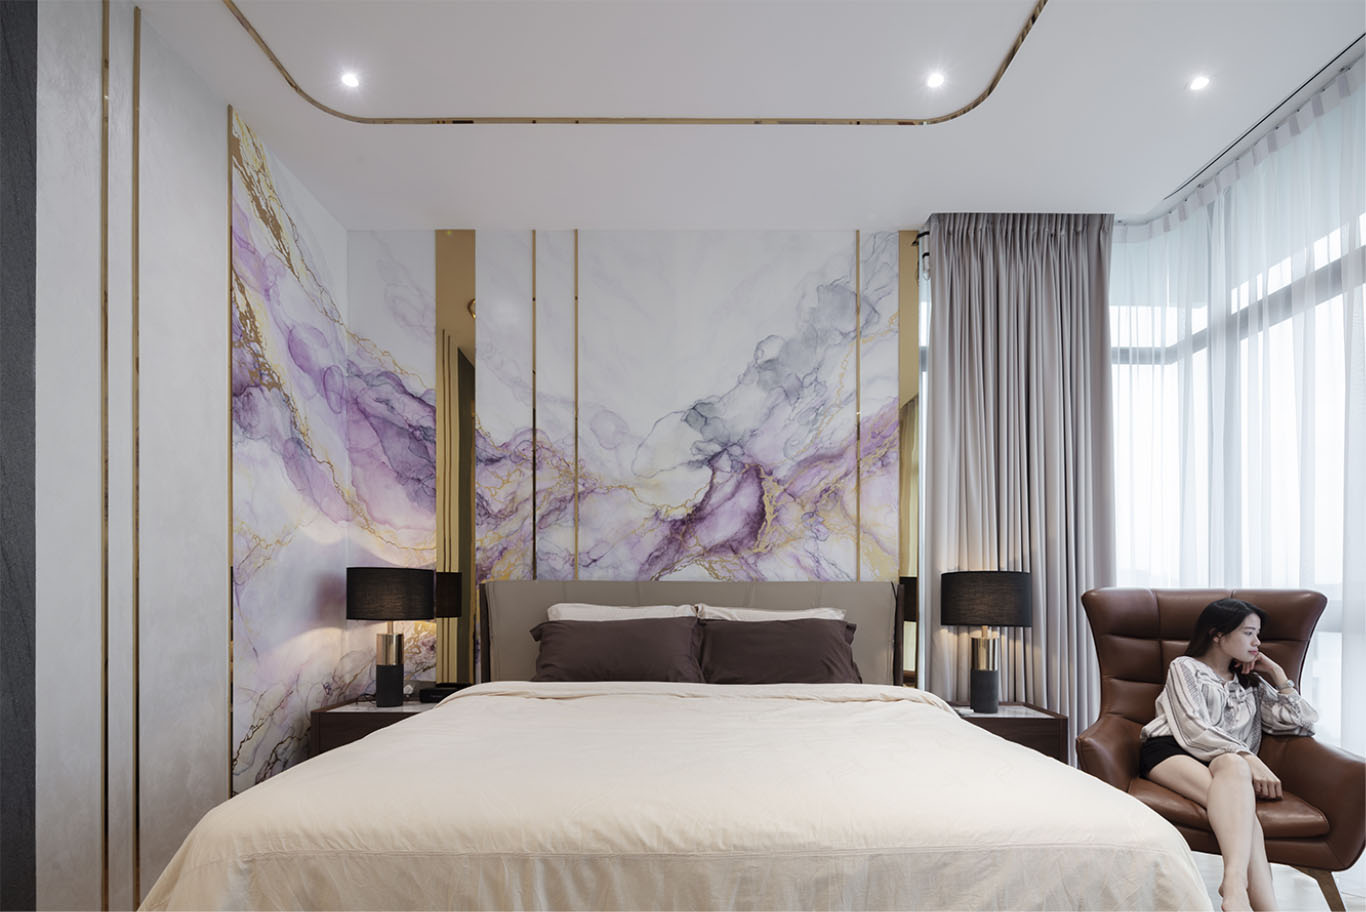 MIEUX La Famillie De Lee luxurious bedroom with white purple and gold marble wall and dark brown table night lamp mieux interior design